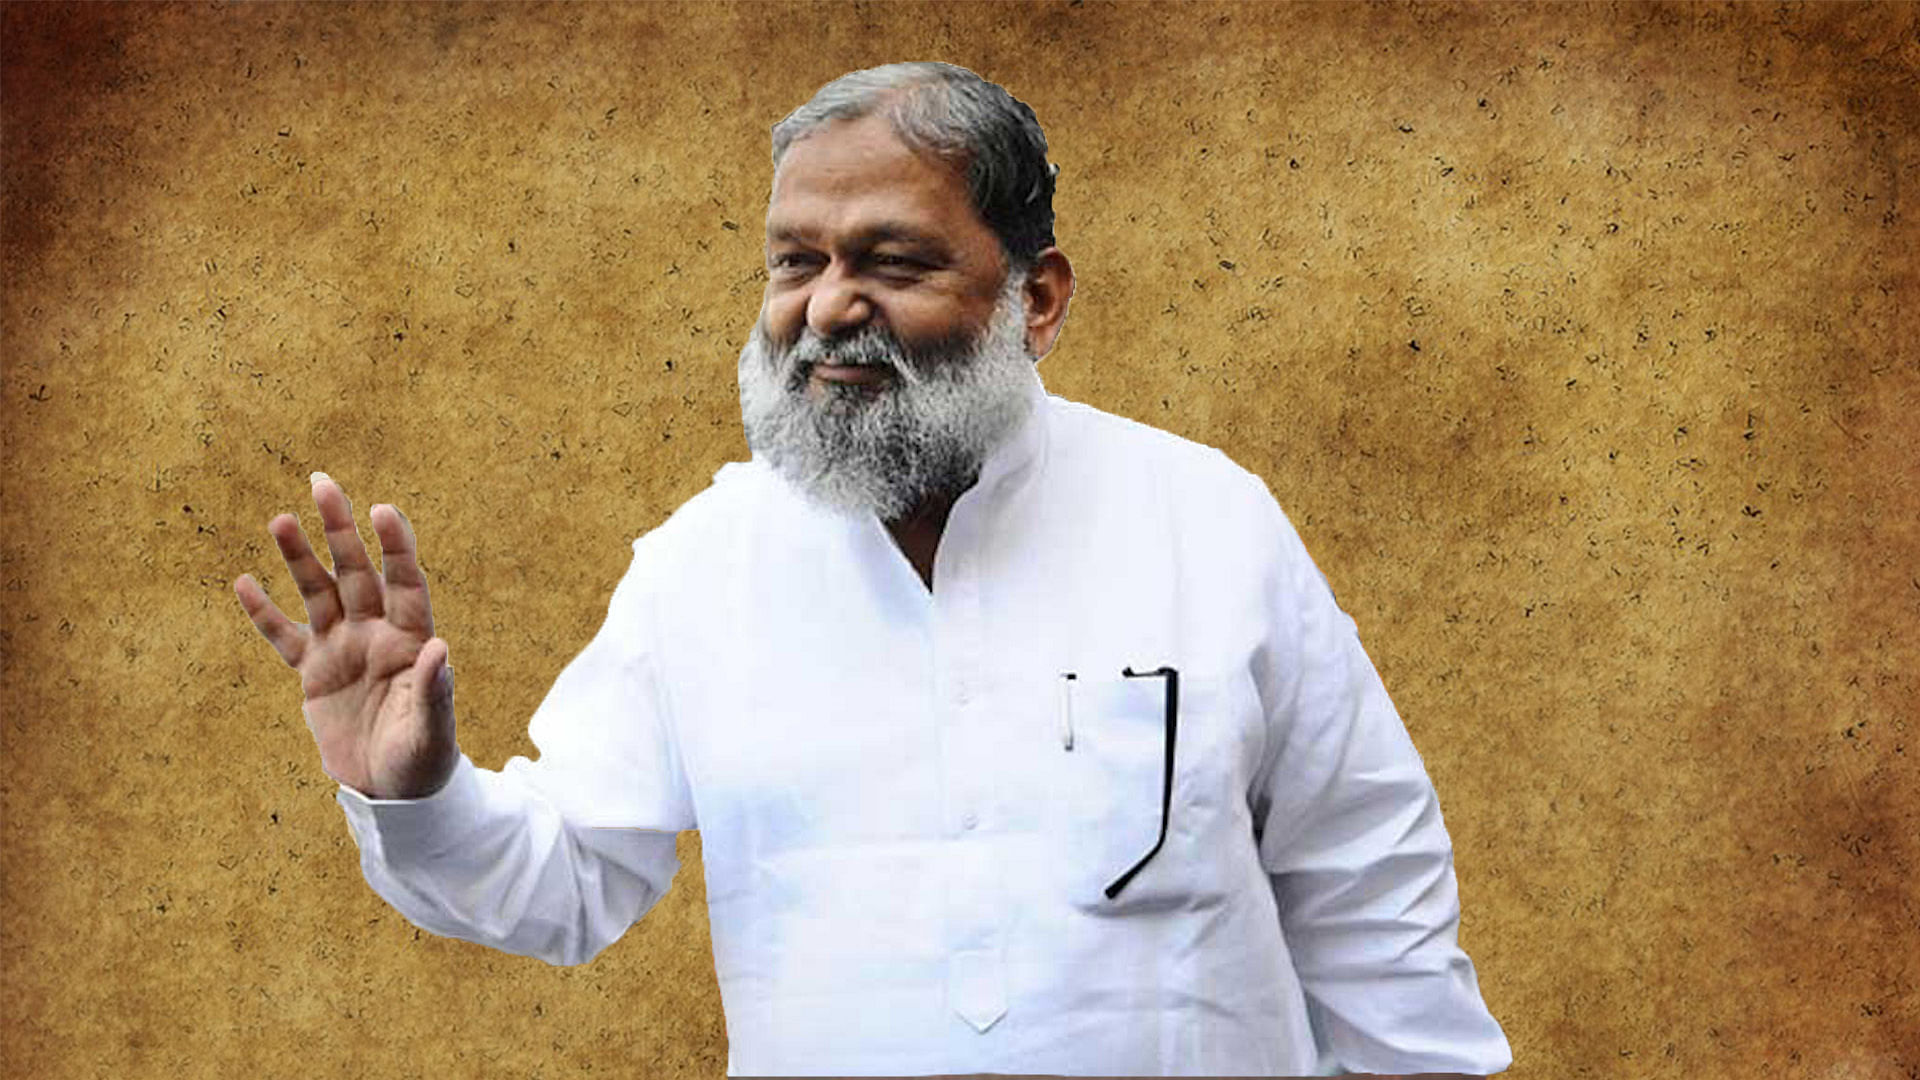 Haryana Health Minister Anil Vij on Thursday, 19 November, took to Twitter to announce that he would be administered a trial dose of Covaxin on Friday, adding that he had volunteered to take it.